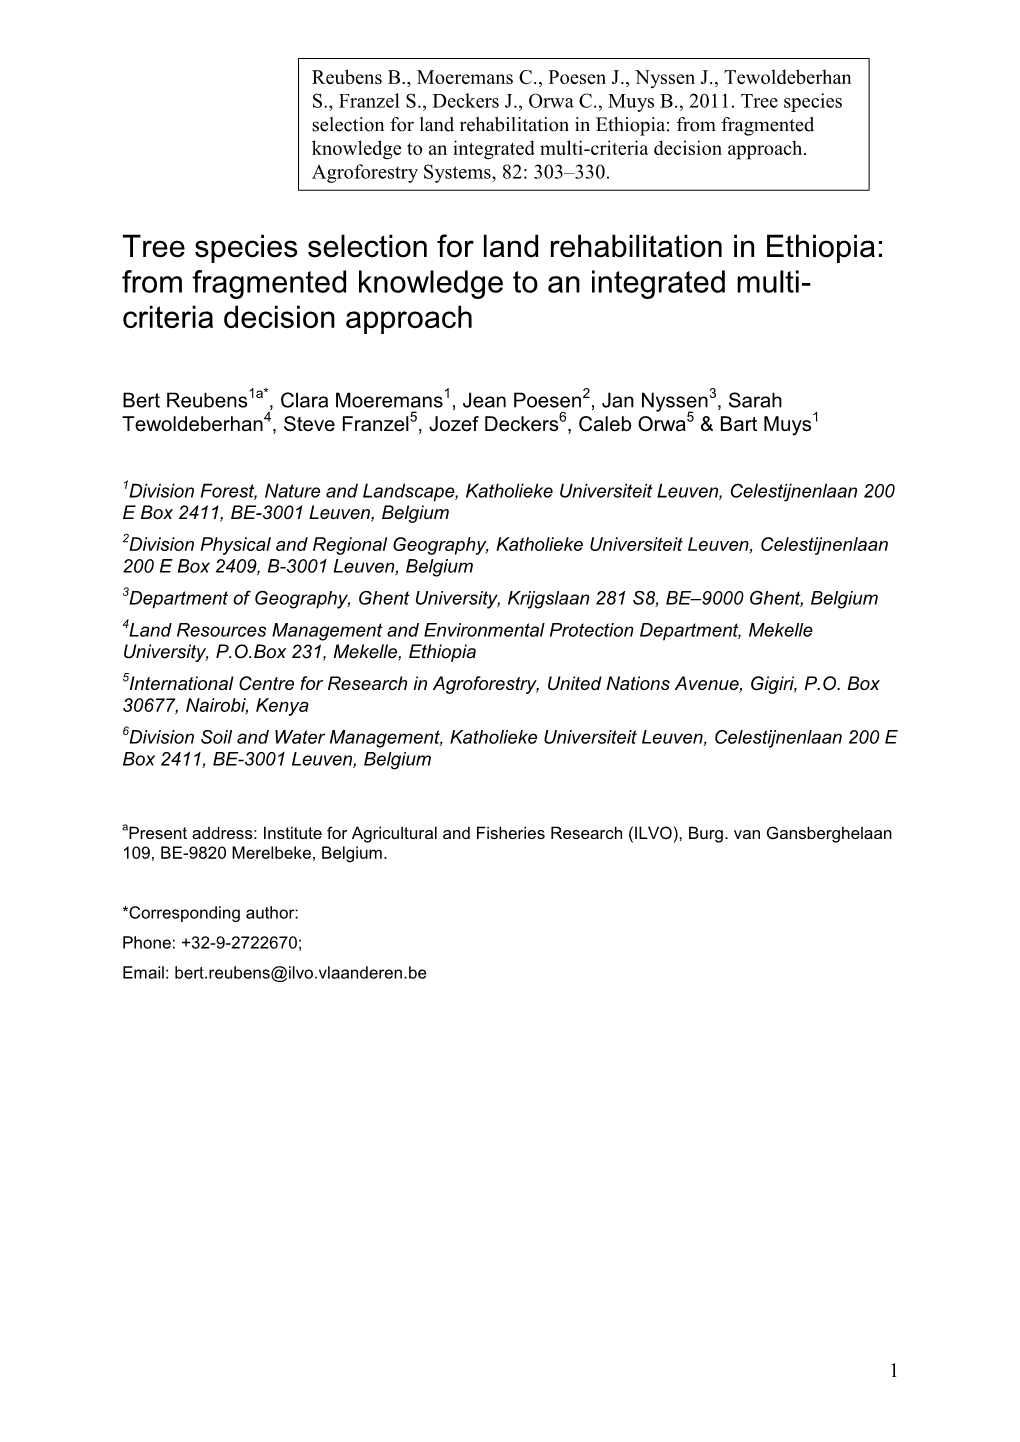 Tree Species Selection for Land Rehabilitation in Ethiopia: from Fragmented Knowledge to an Integrated Multi-Criteria Decision Approach